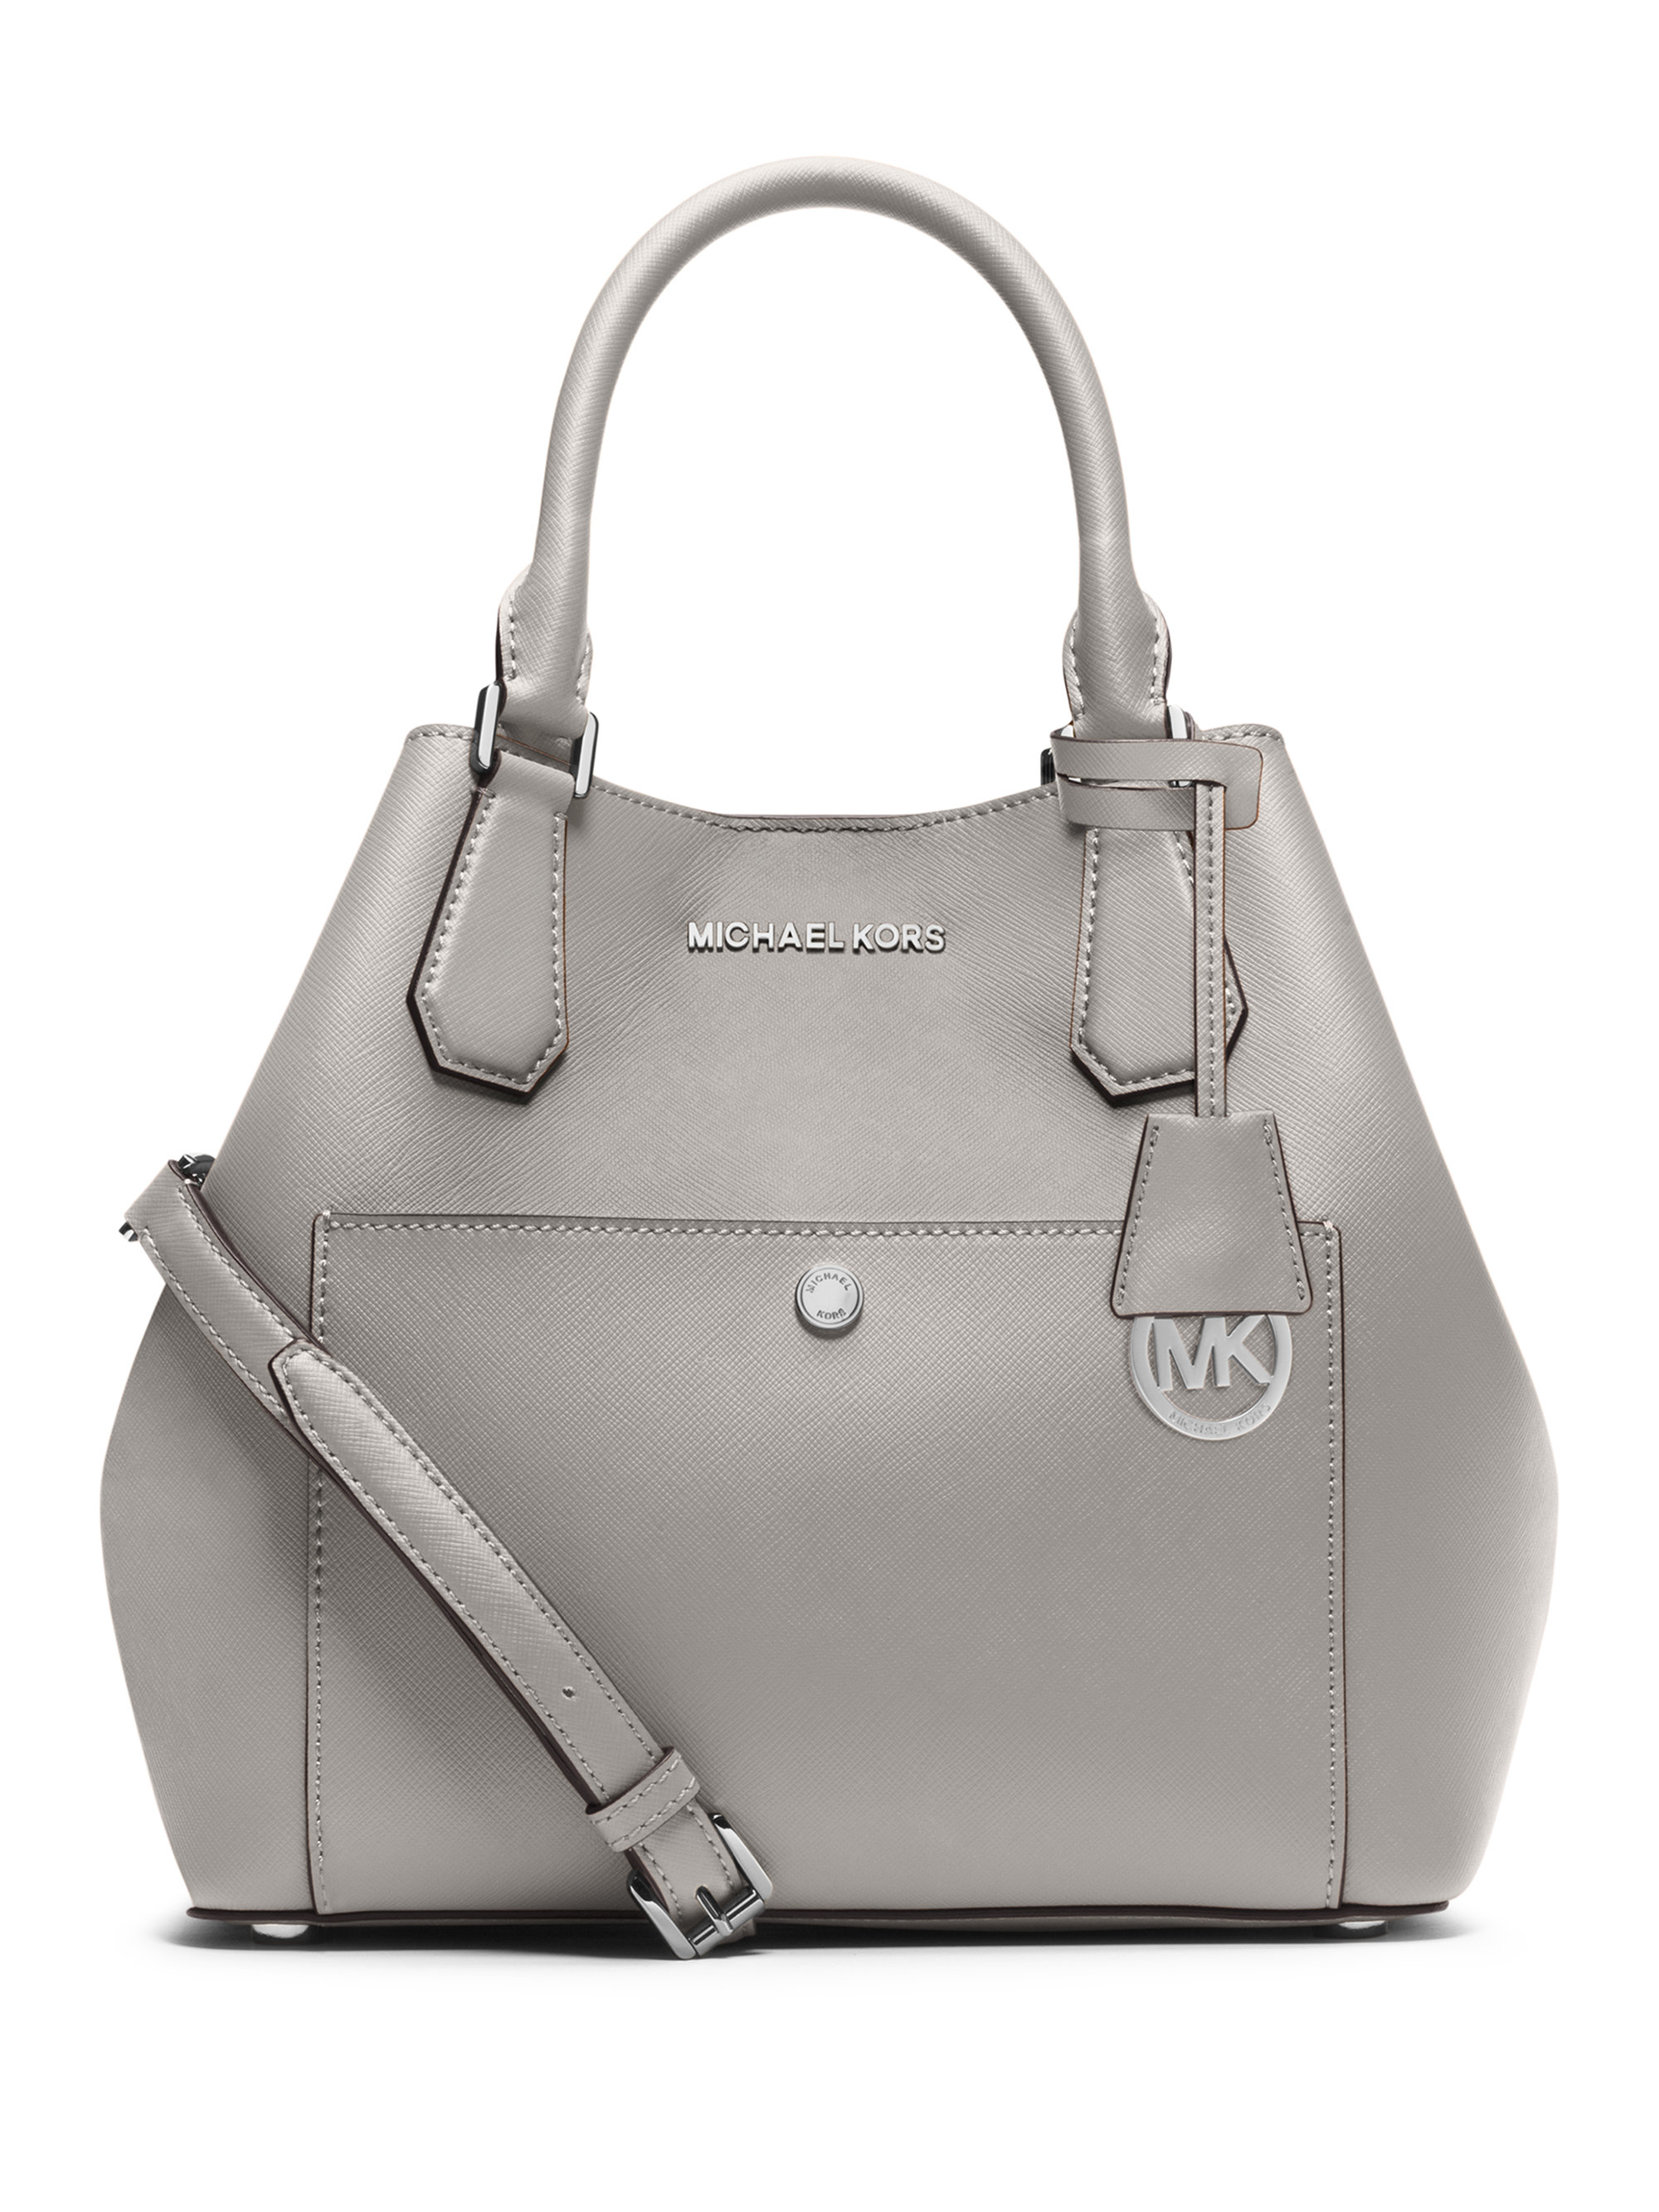 Michael michael kors Saffiano Leather Grab Bag in Gray | Lyst